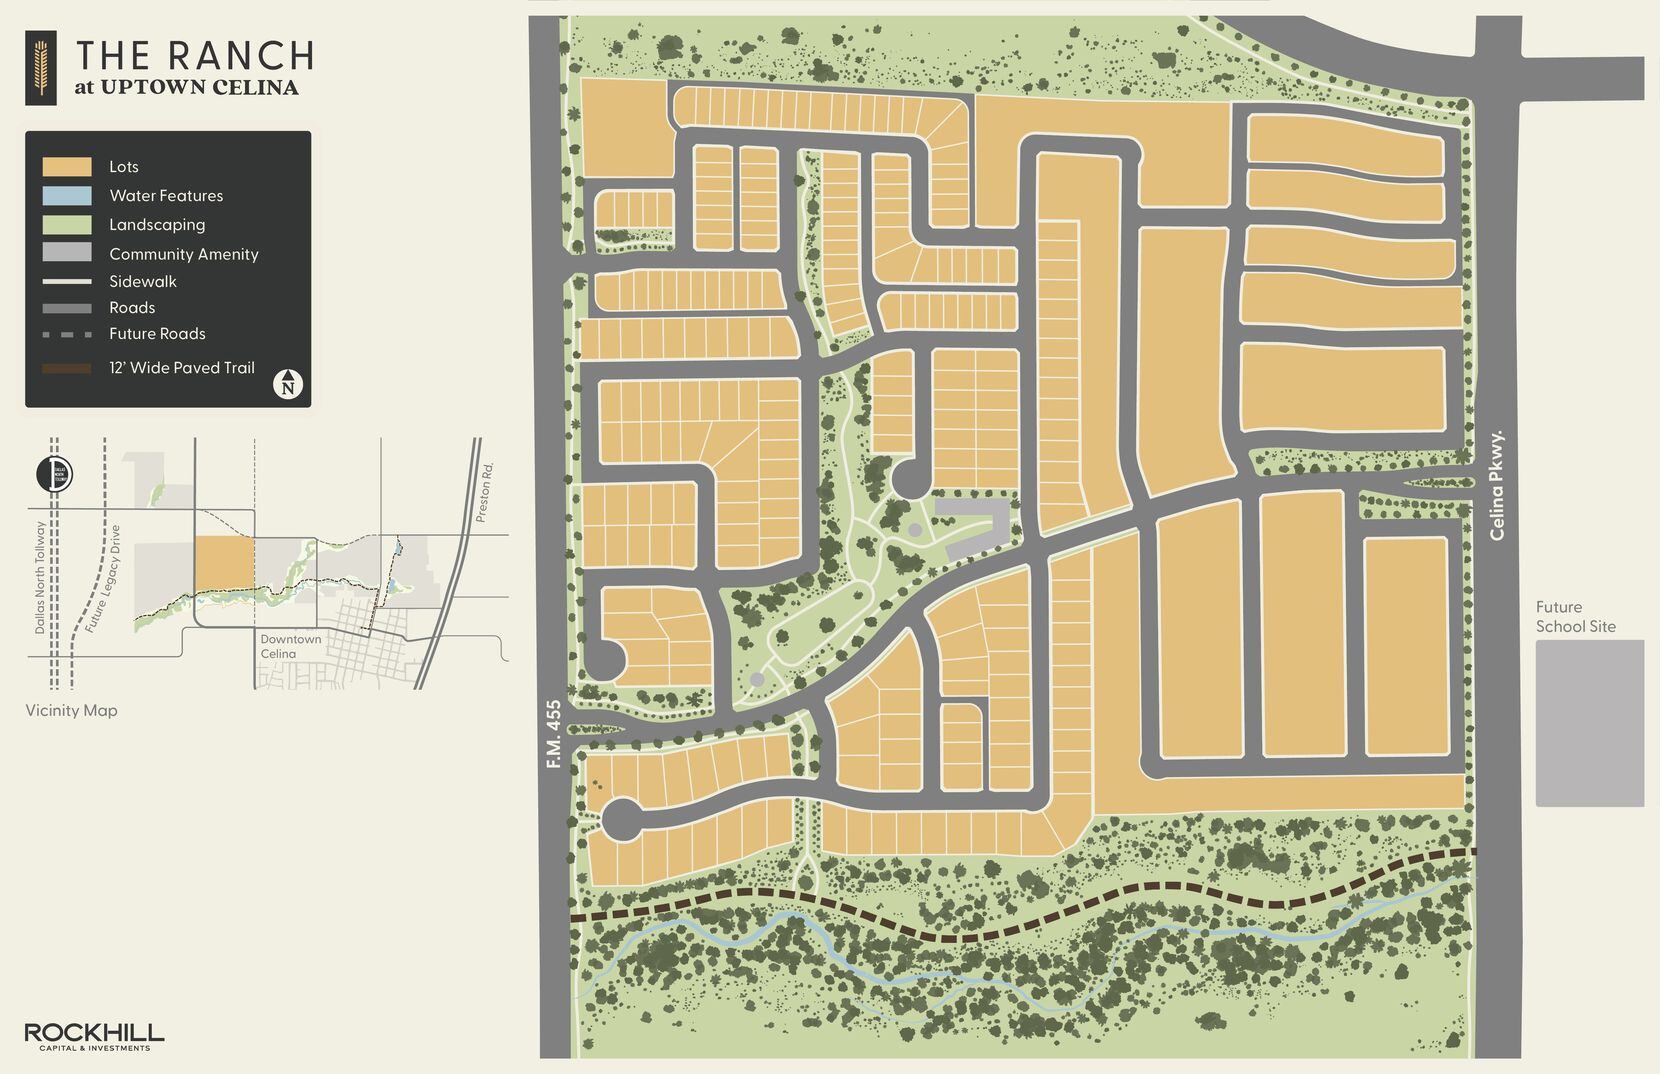 A site plan of The Ranch at Uptown Celina.